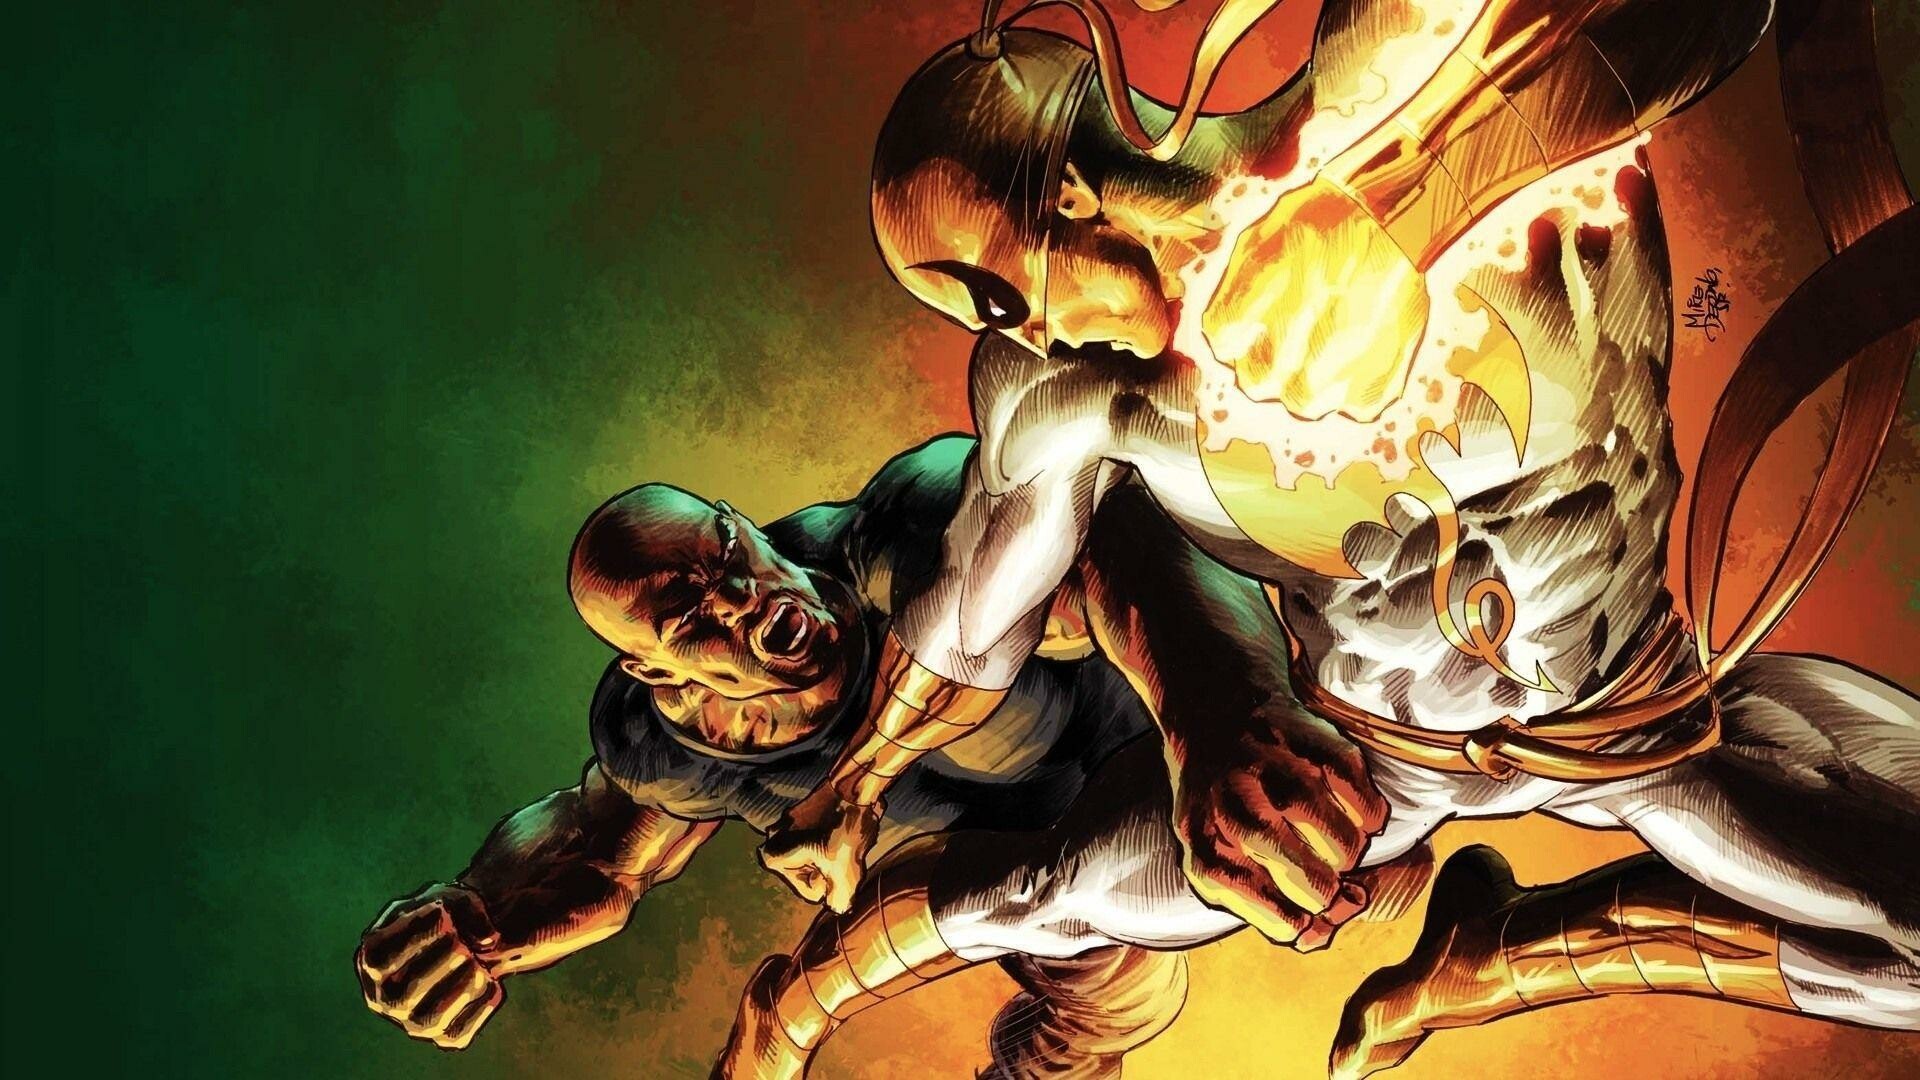 Iron Fist: Danny Rand, a martial arts master born into excessive wealth who cleans up the streets of New York, often alongside his friend Luke Cage. 1920x1080 Full HD Background.